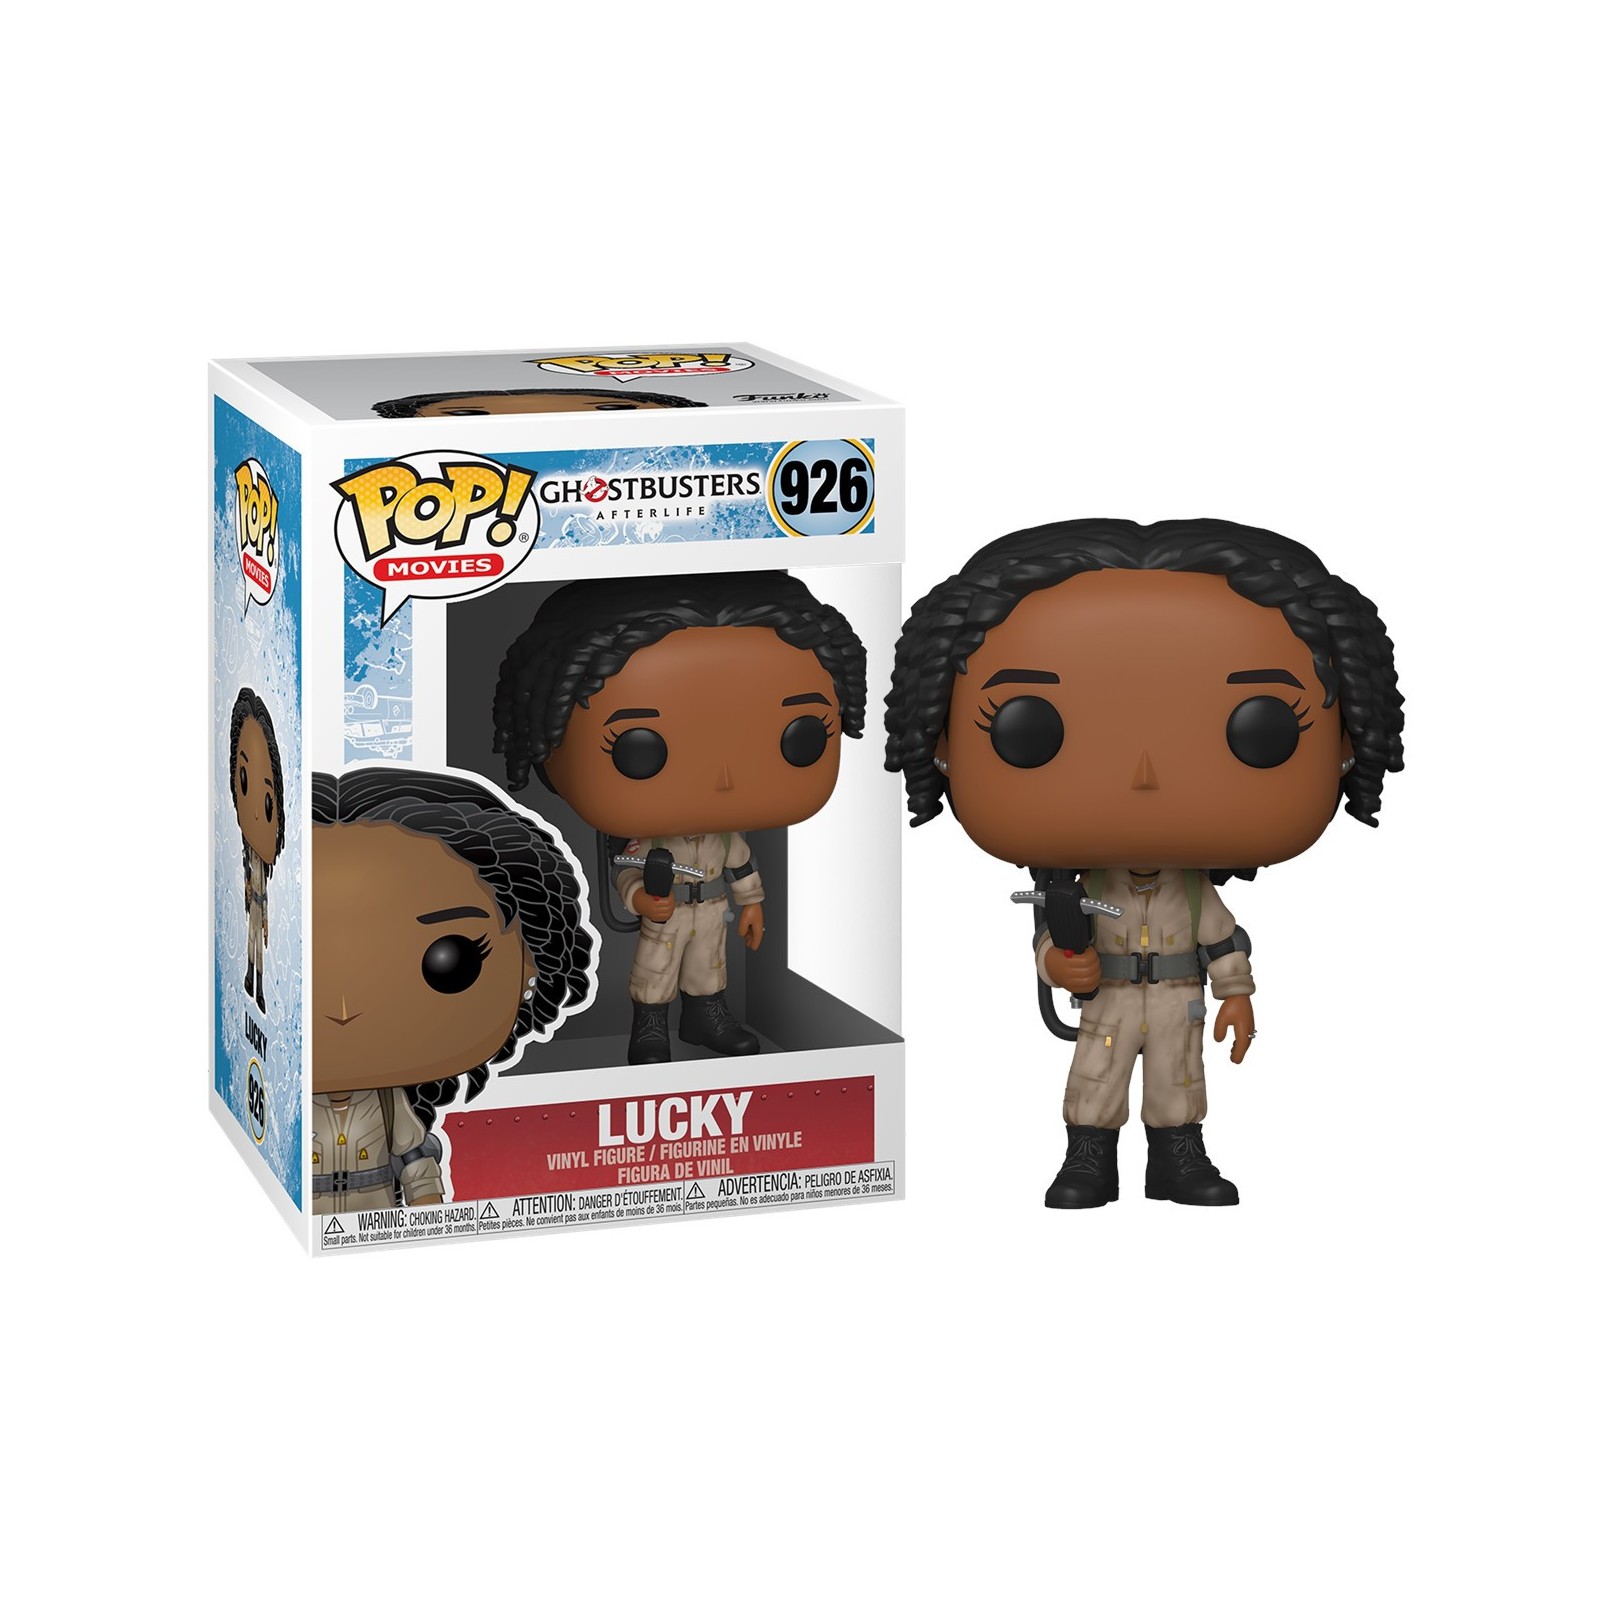 FUNKO POP! MOVIES - GHOSTBUSTERS AFTERLIFE: LUCKY (926)